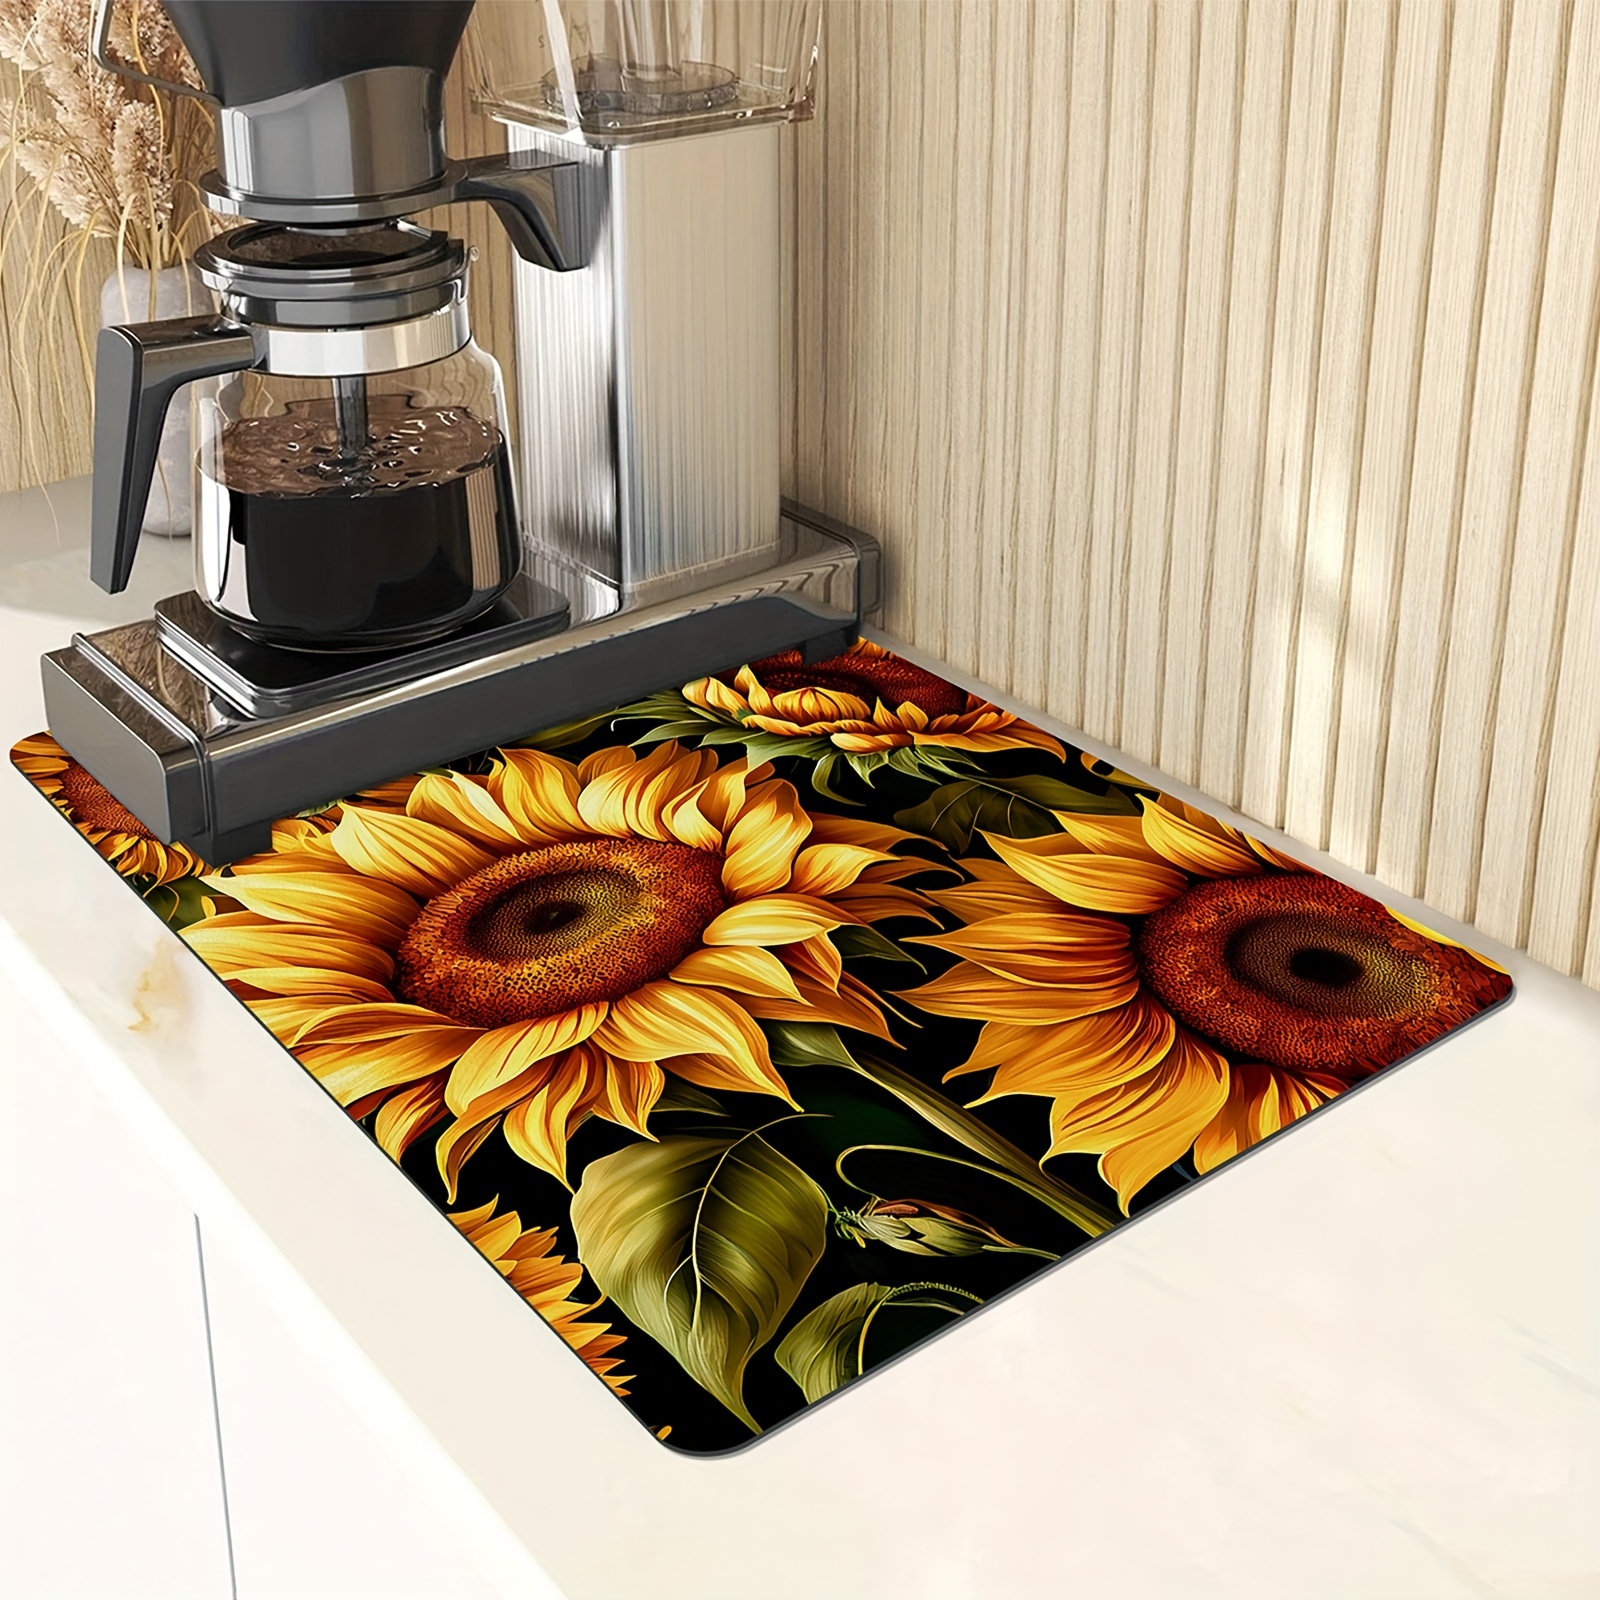 

1pc Non-slip Sunflower Dish Drying Mat - Super Absorbent And Wear-resistant Coffee Machine Mat For Home Kitchen Supplies And Patio Table Decorations